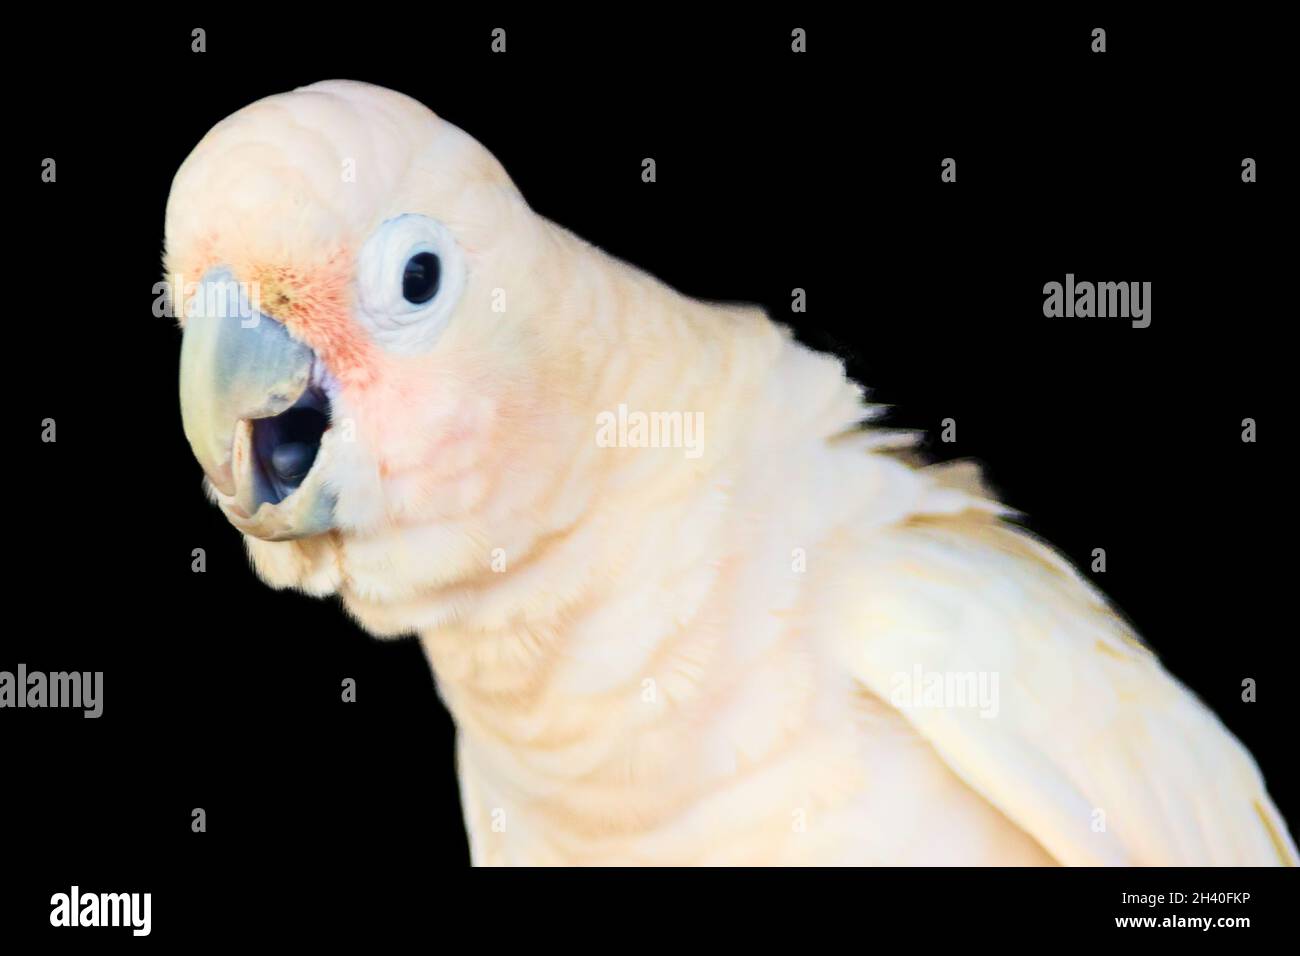 Greater sulphur-crested cockatoo Stock Photo